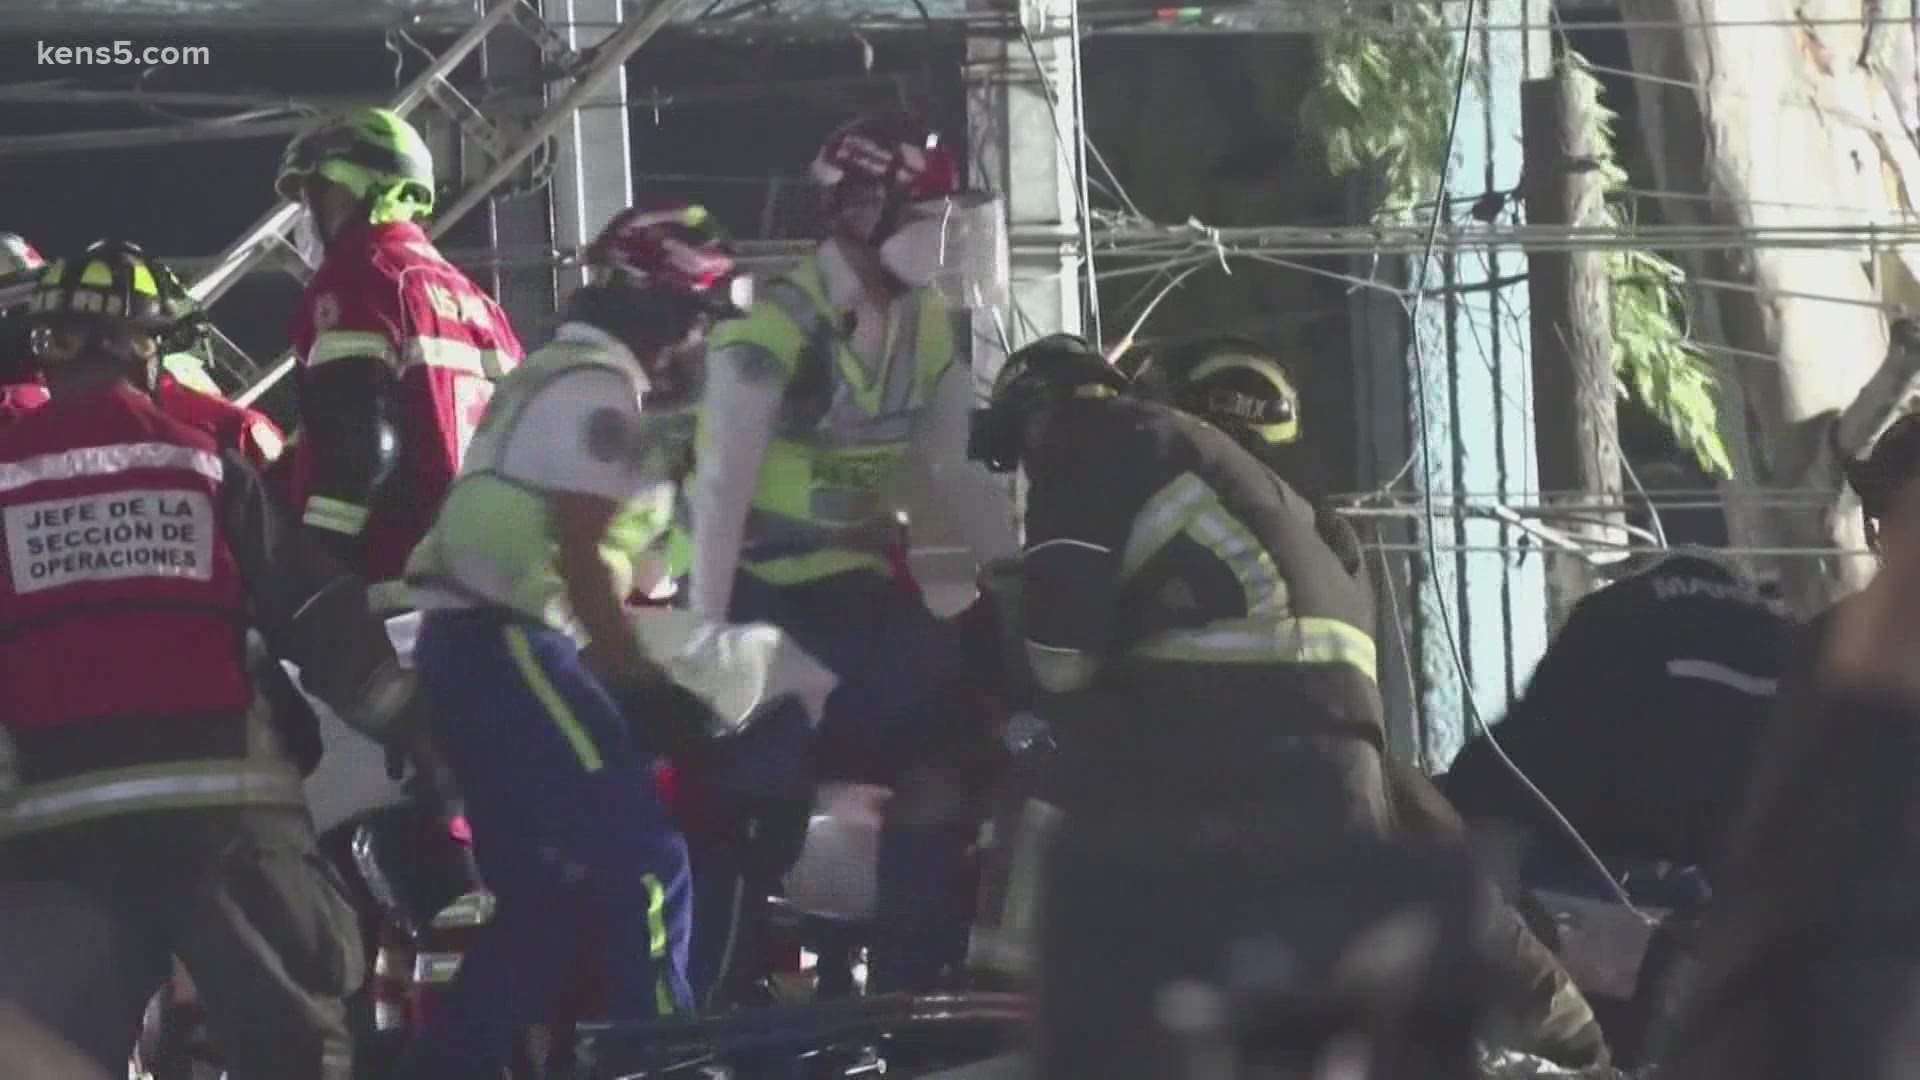 Mexico City officials say children are among the dead in the tragedy.